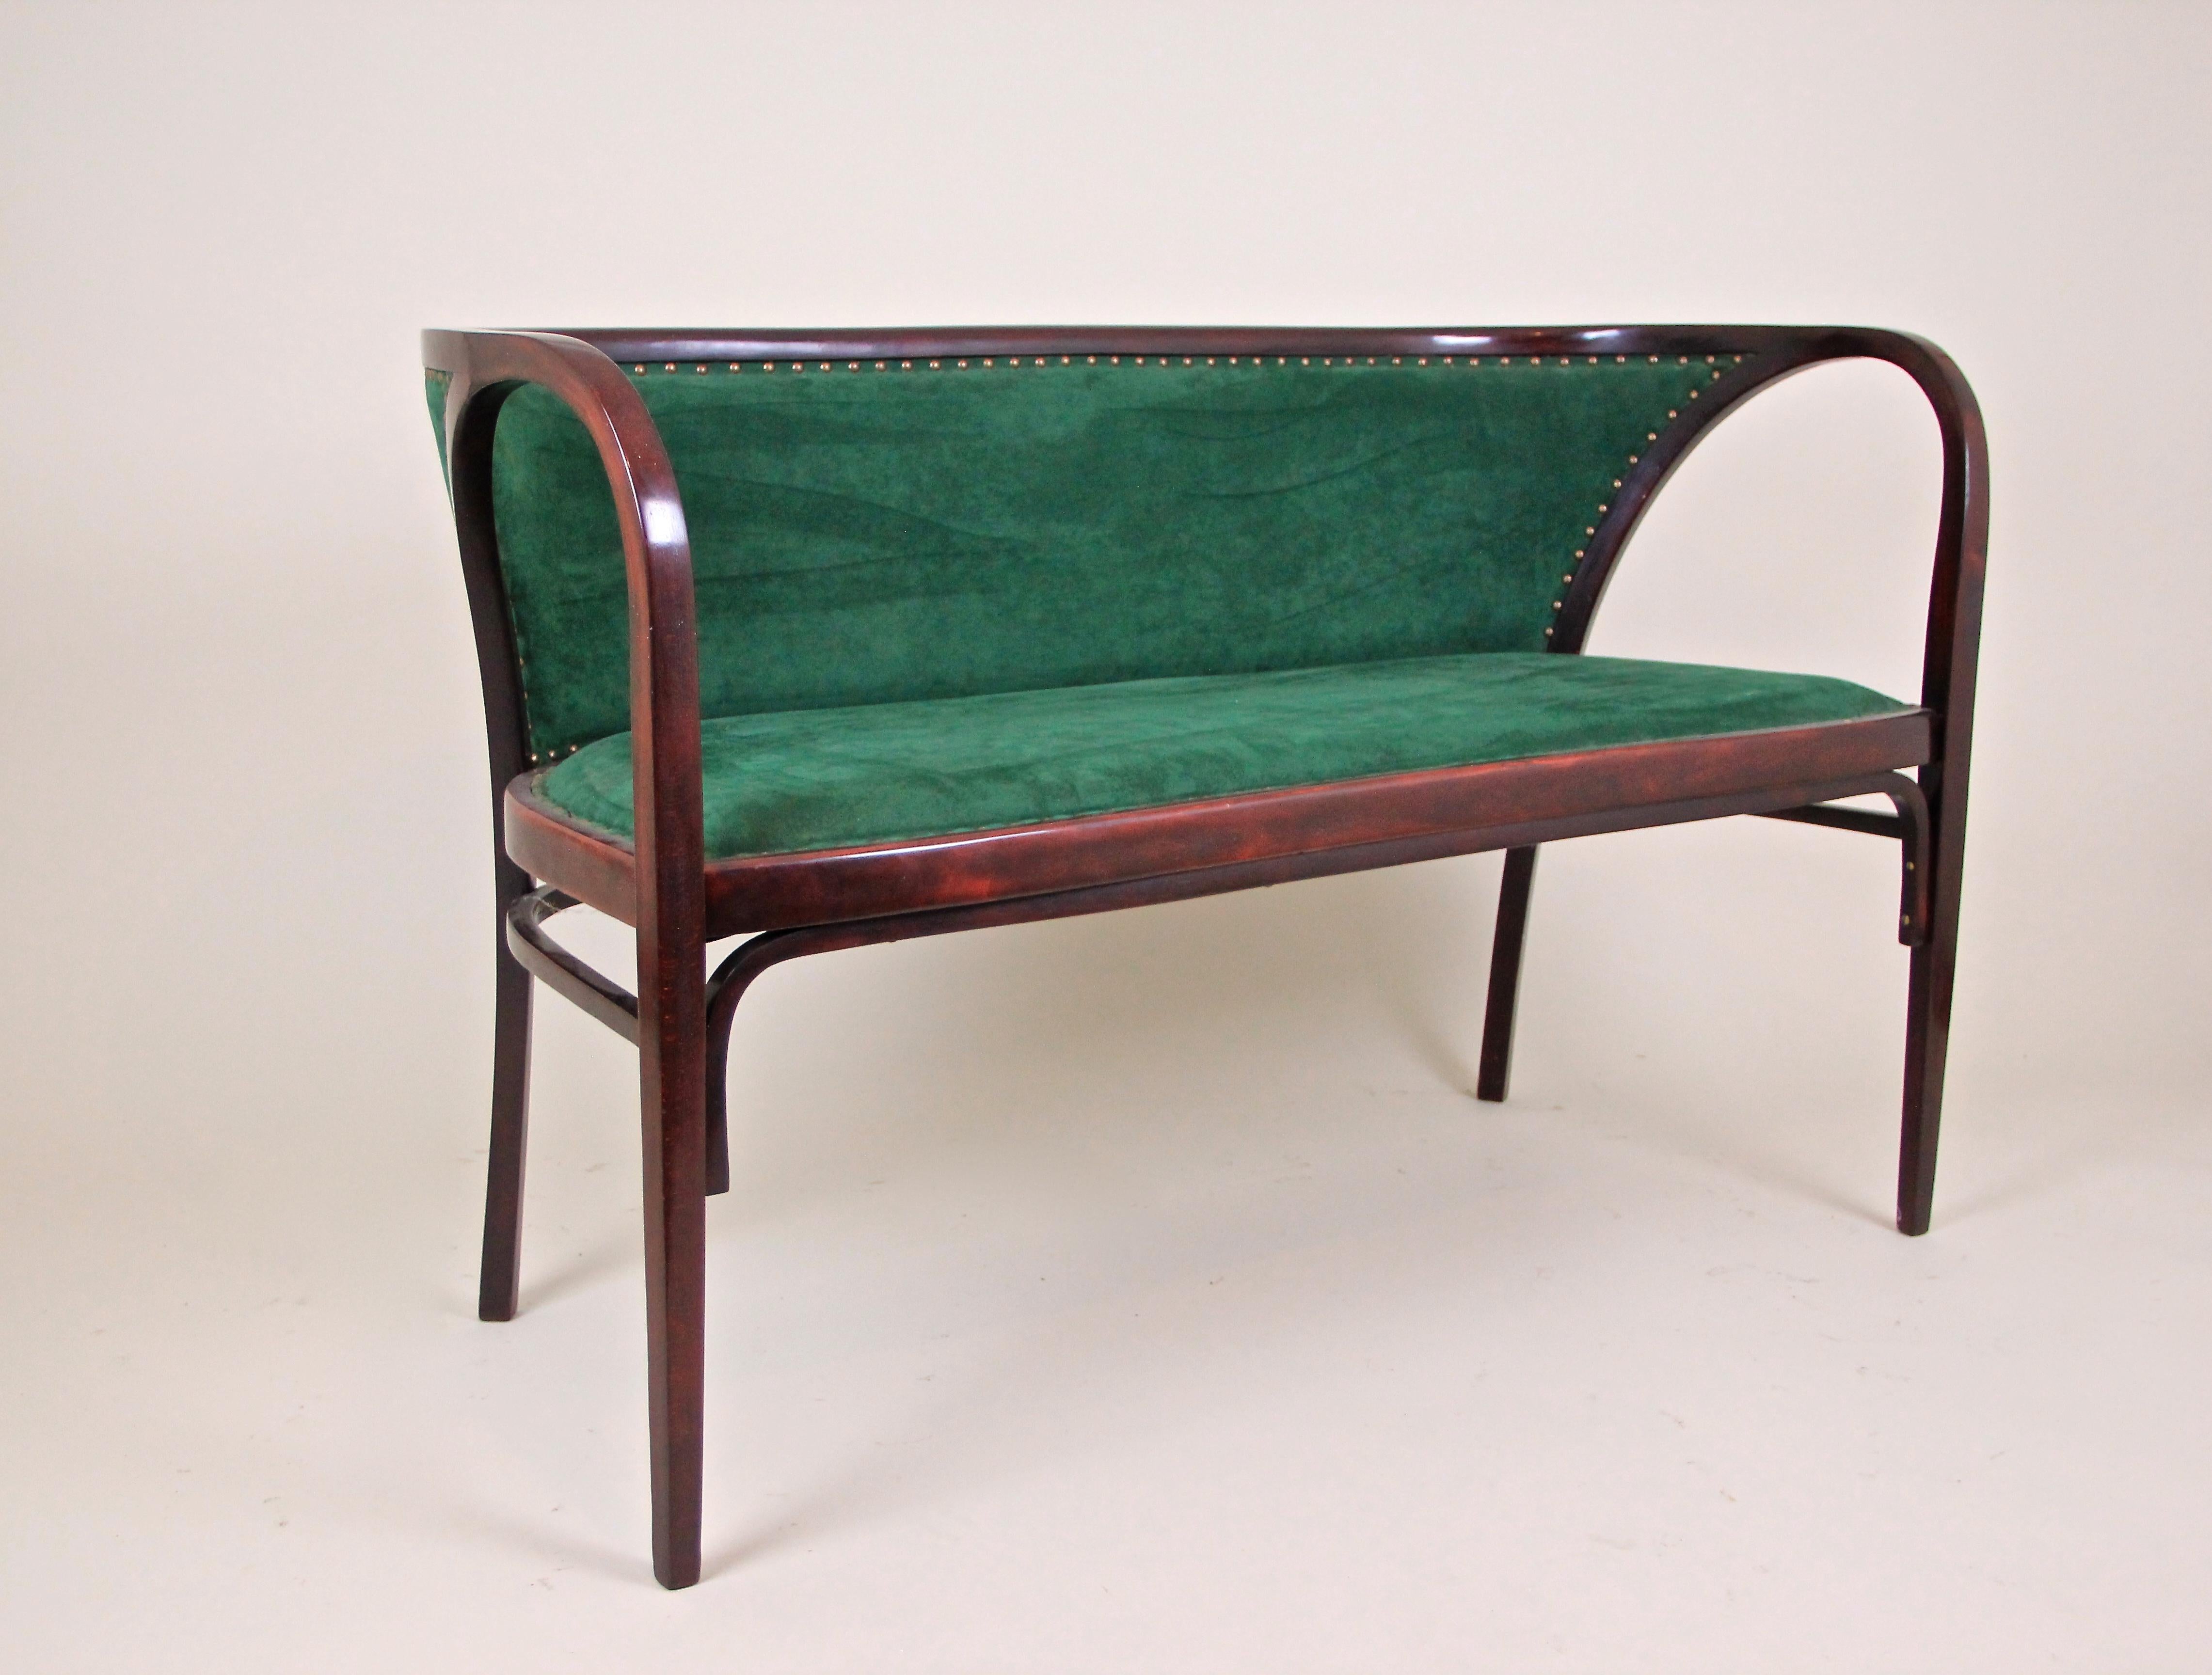 Fabric Thonet Bentwood Seating Set/ Salon Suite by M. Kammerer, Austria, circa 1910 For Sale